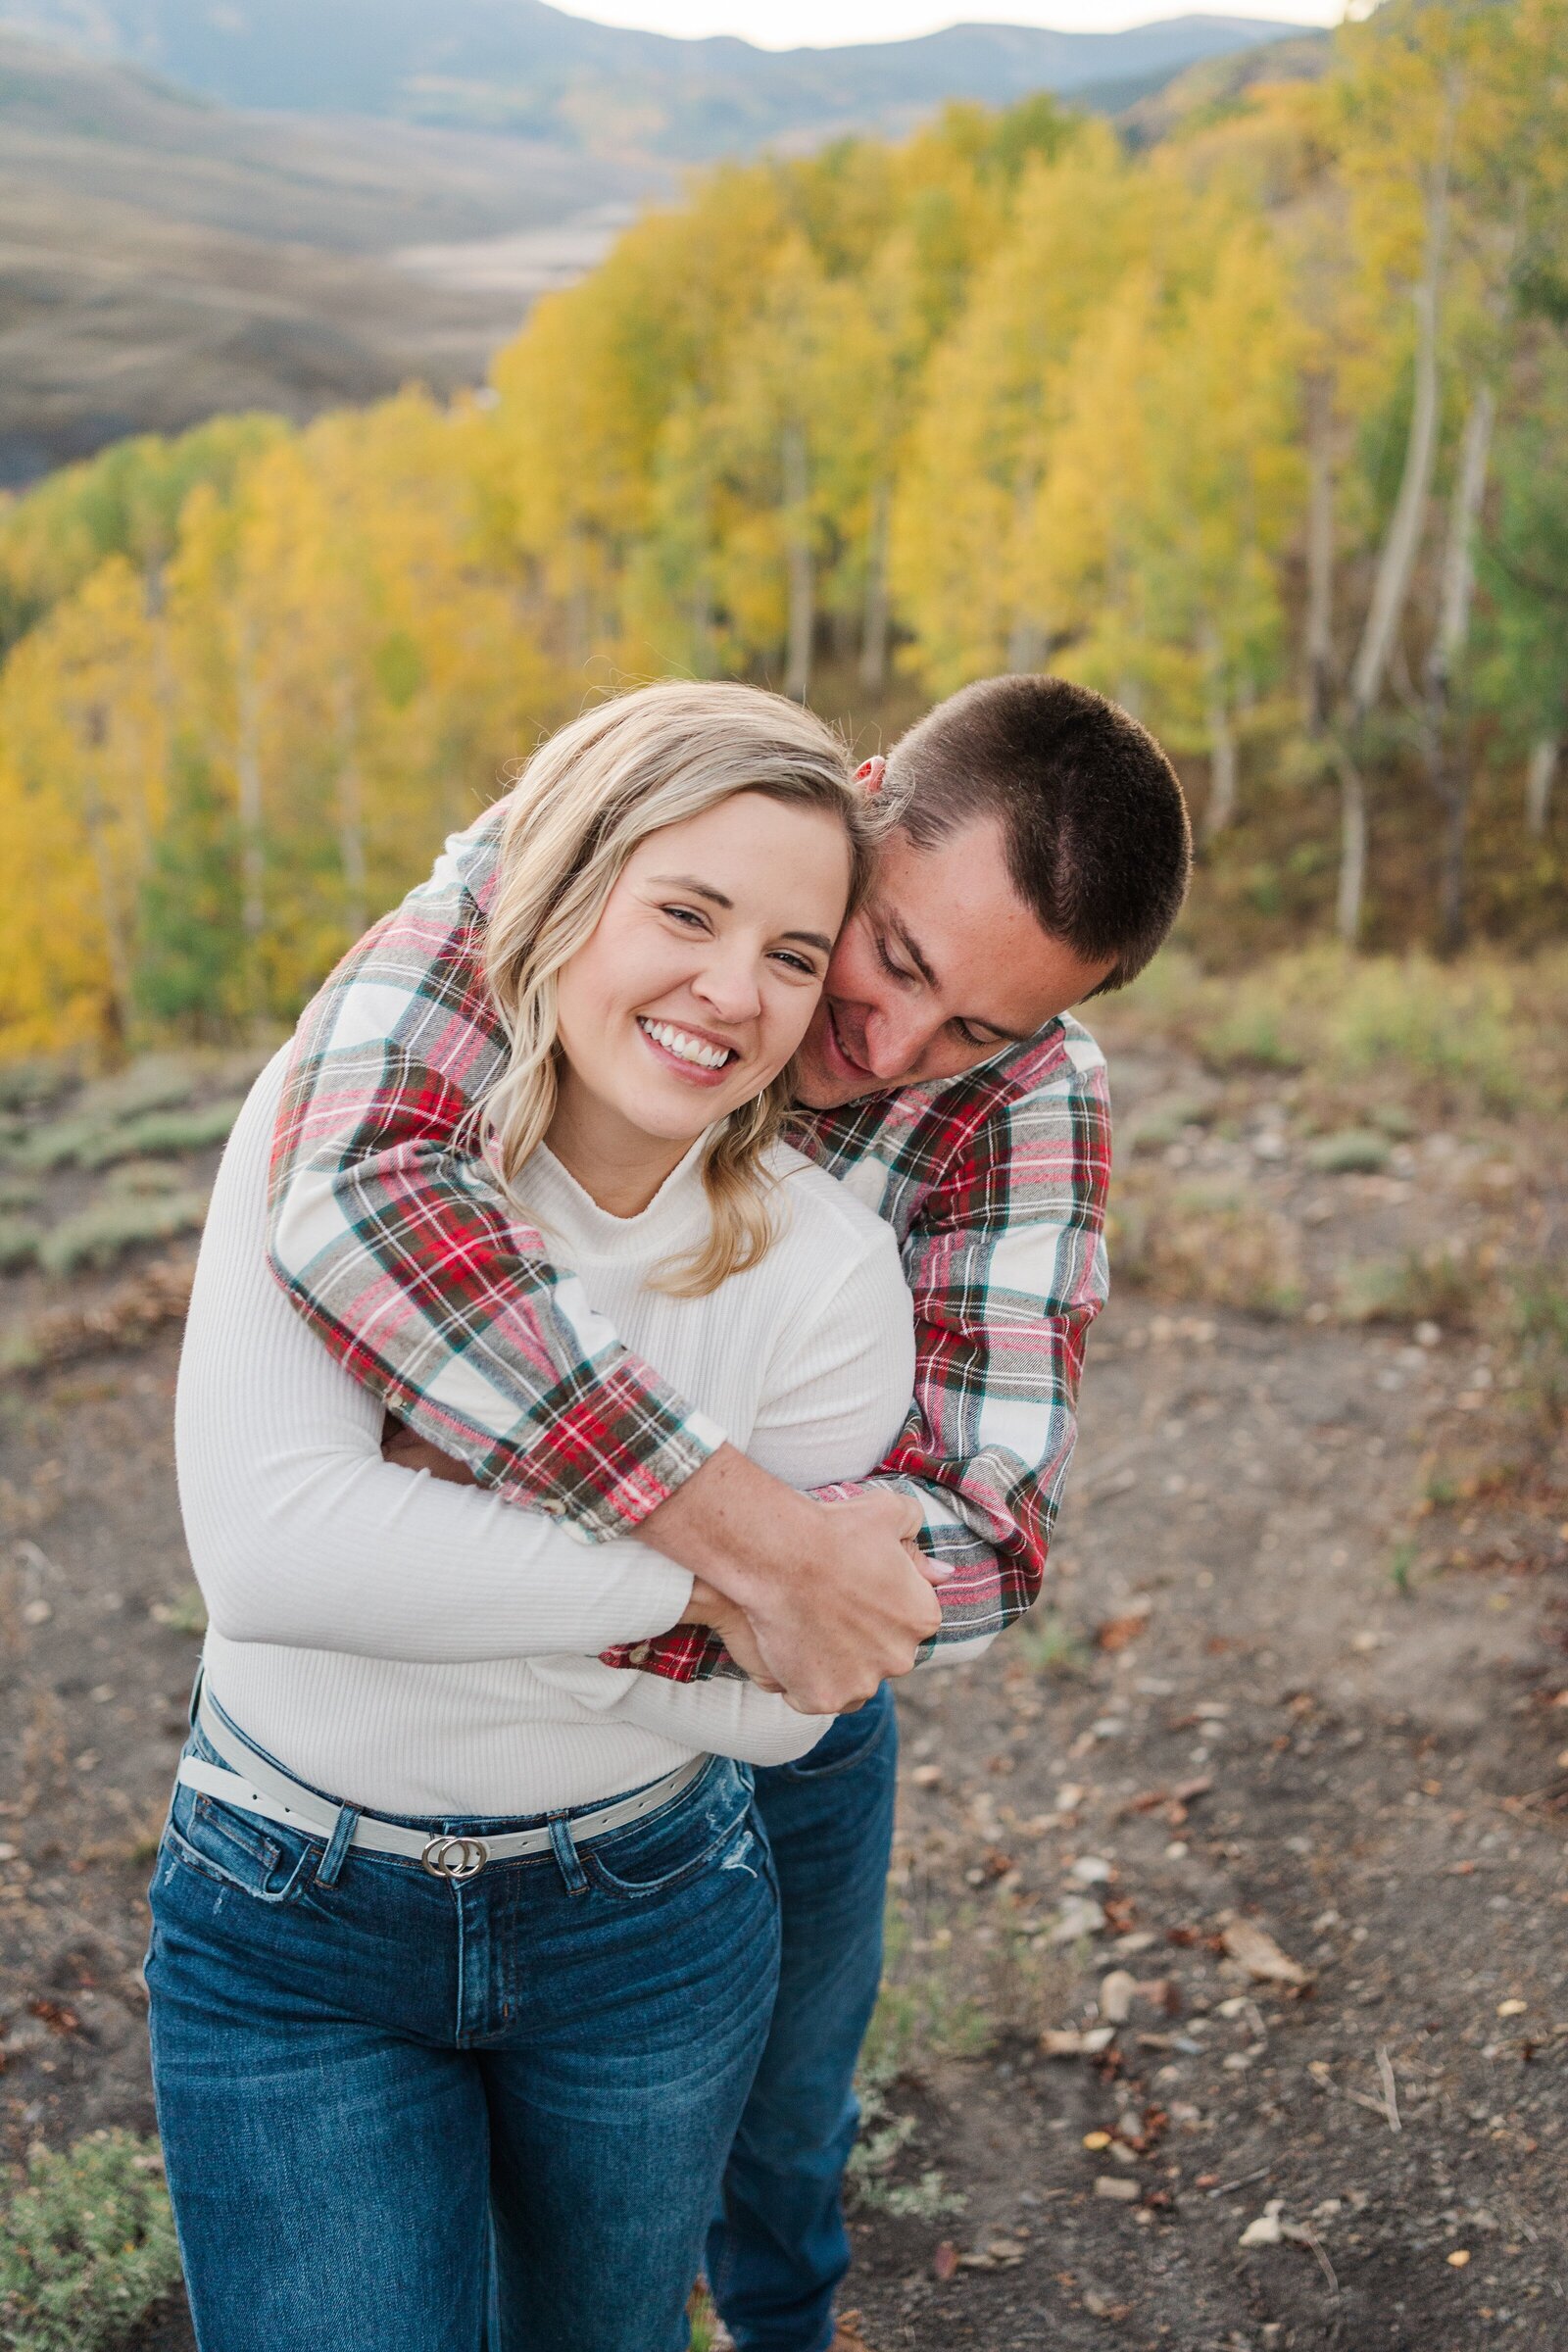 Make your destination wedding unforgettable with Samantha Immer Photography. Our customized and personalized approach will capture the beauty of Colorado and tell the story of your special day.